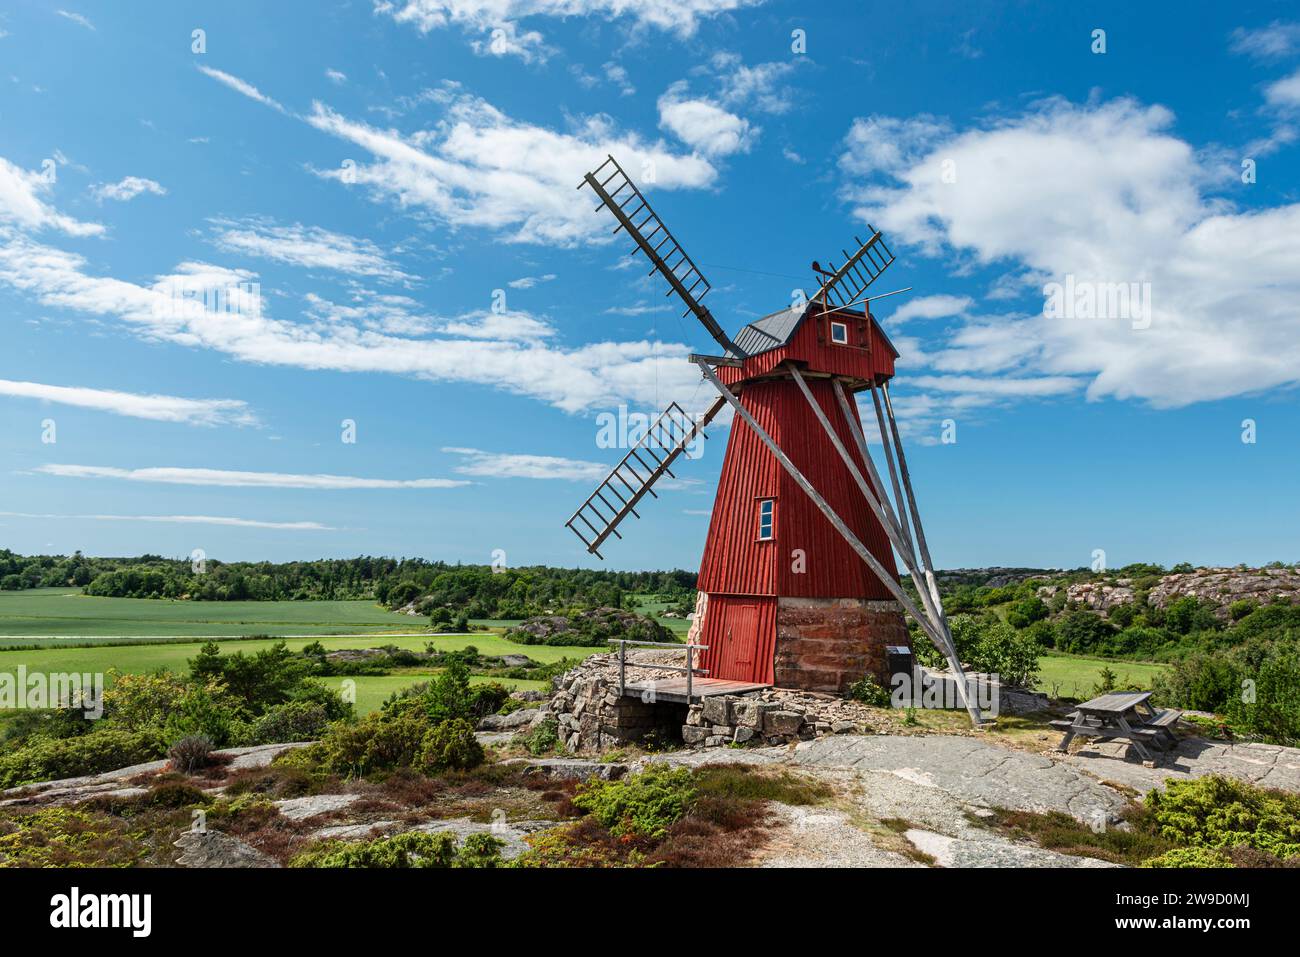 Ulseröd windmill with wooden façade in red colour on a hill near Saltvik in the archipelago of the west coast of Sweden, Bohuslän, Tanumshede Stock Photo